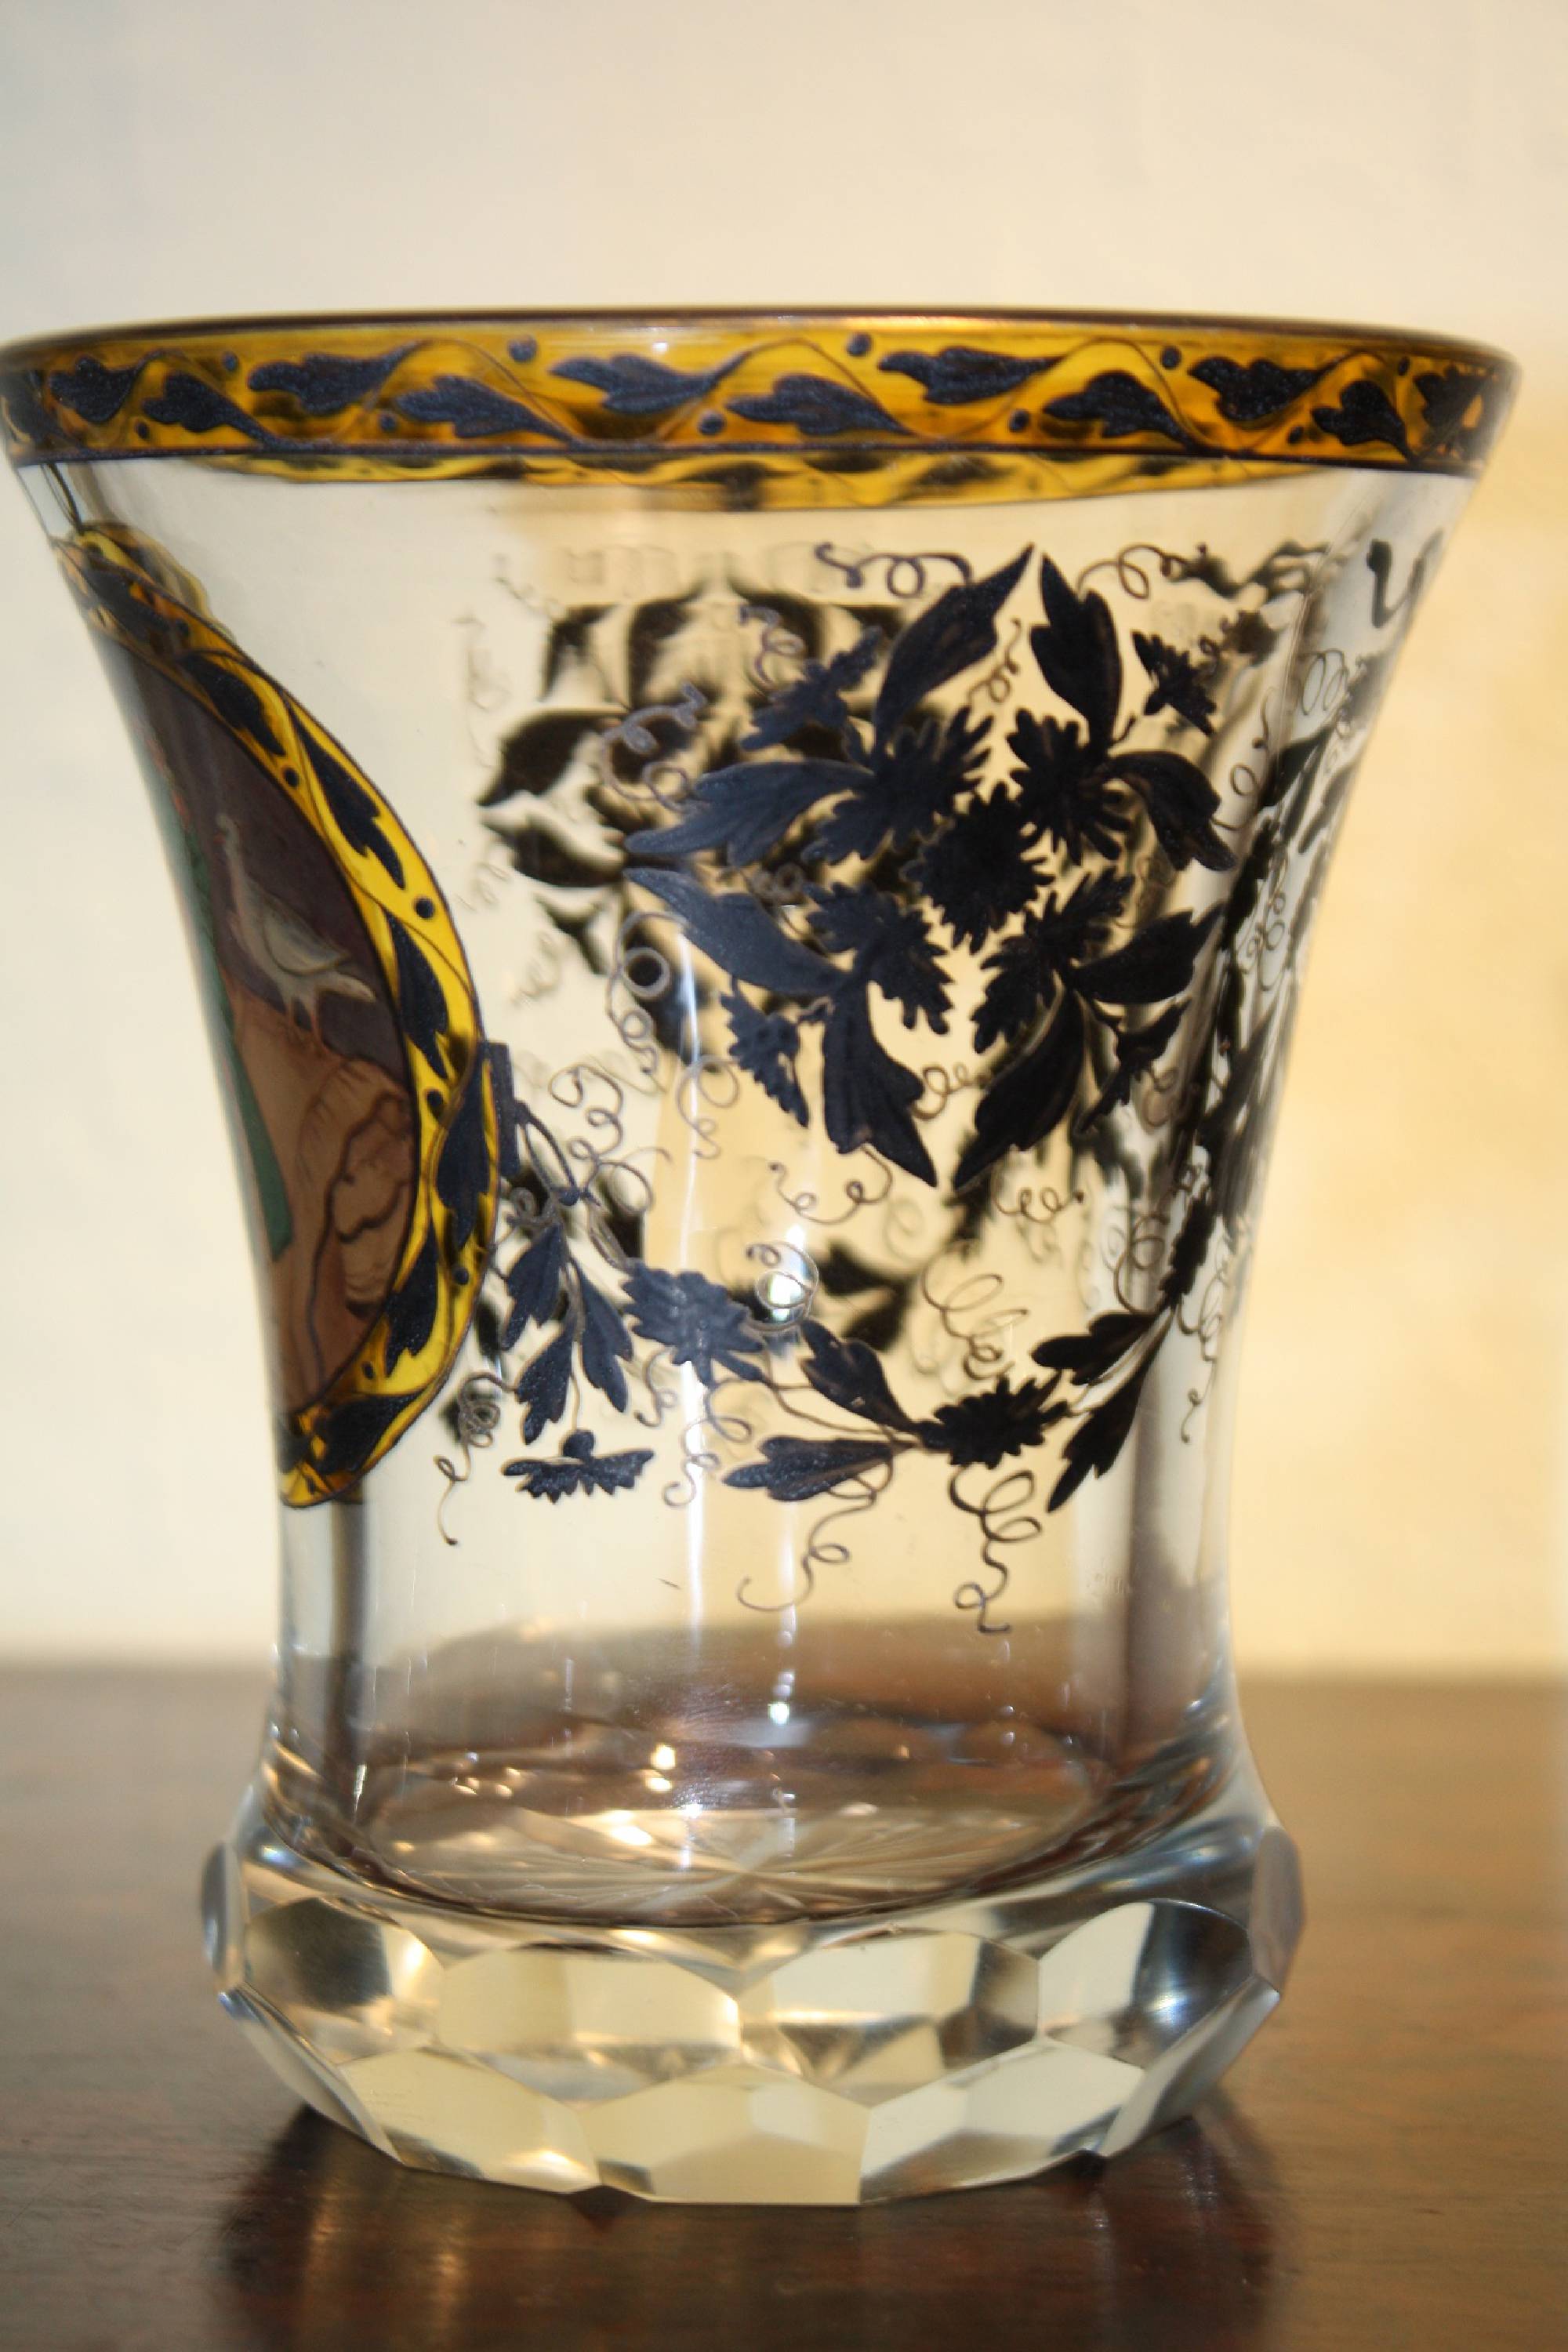 Antique 19th century Bohemian glass beaker with a hand-painted lady's portrait